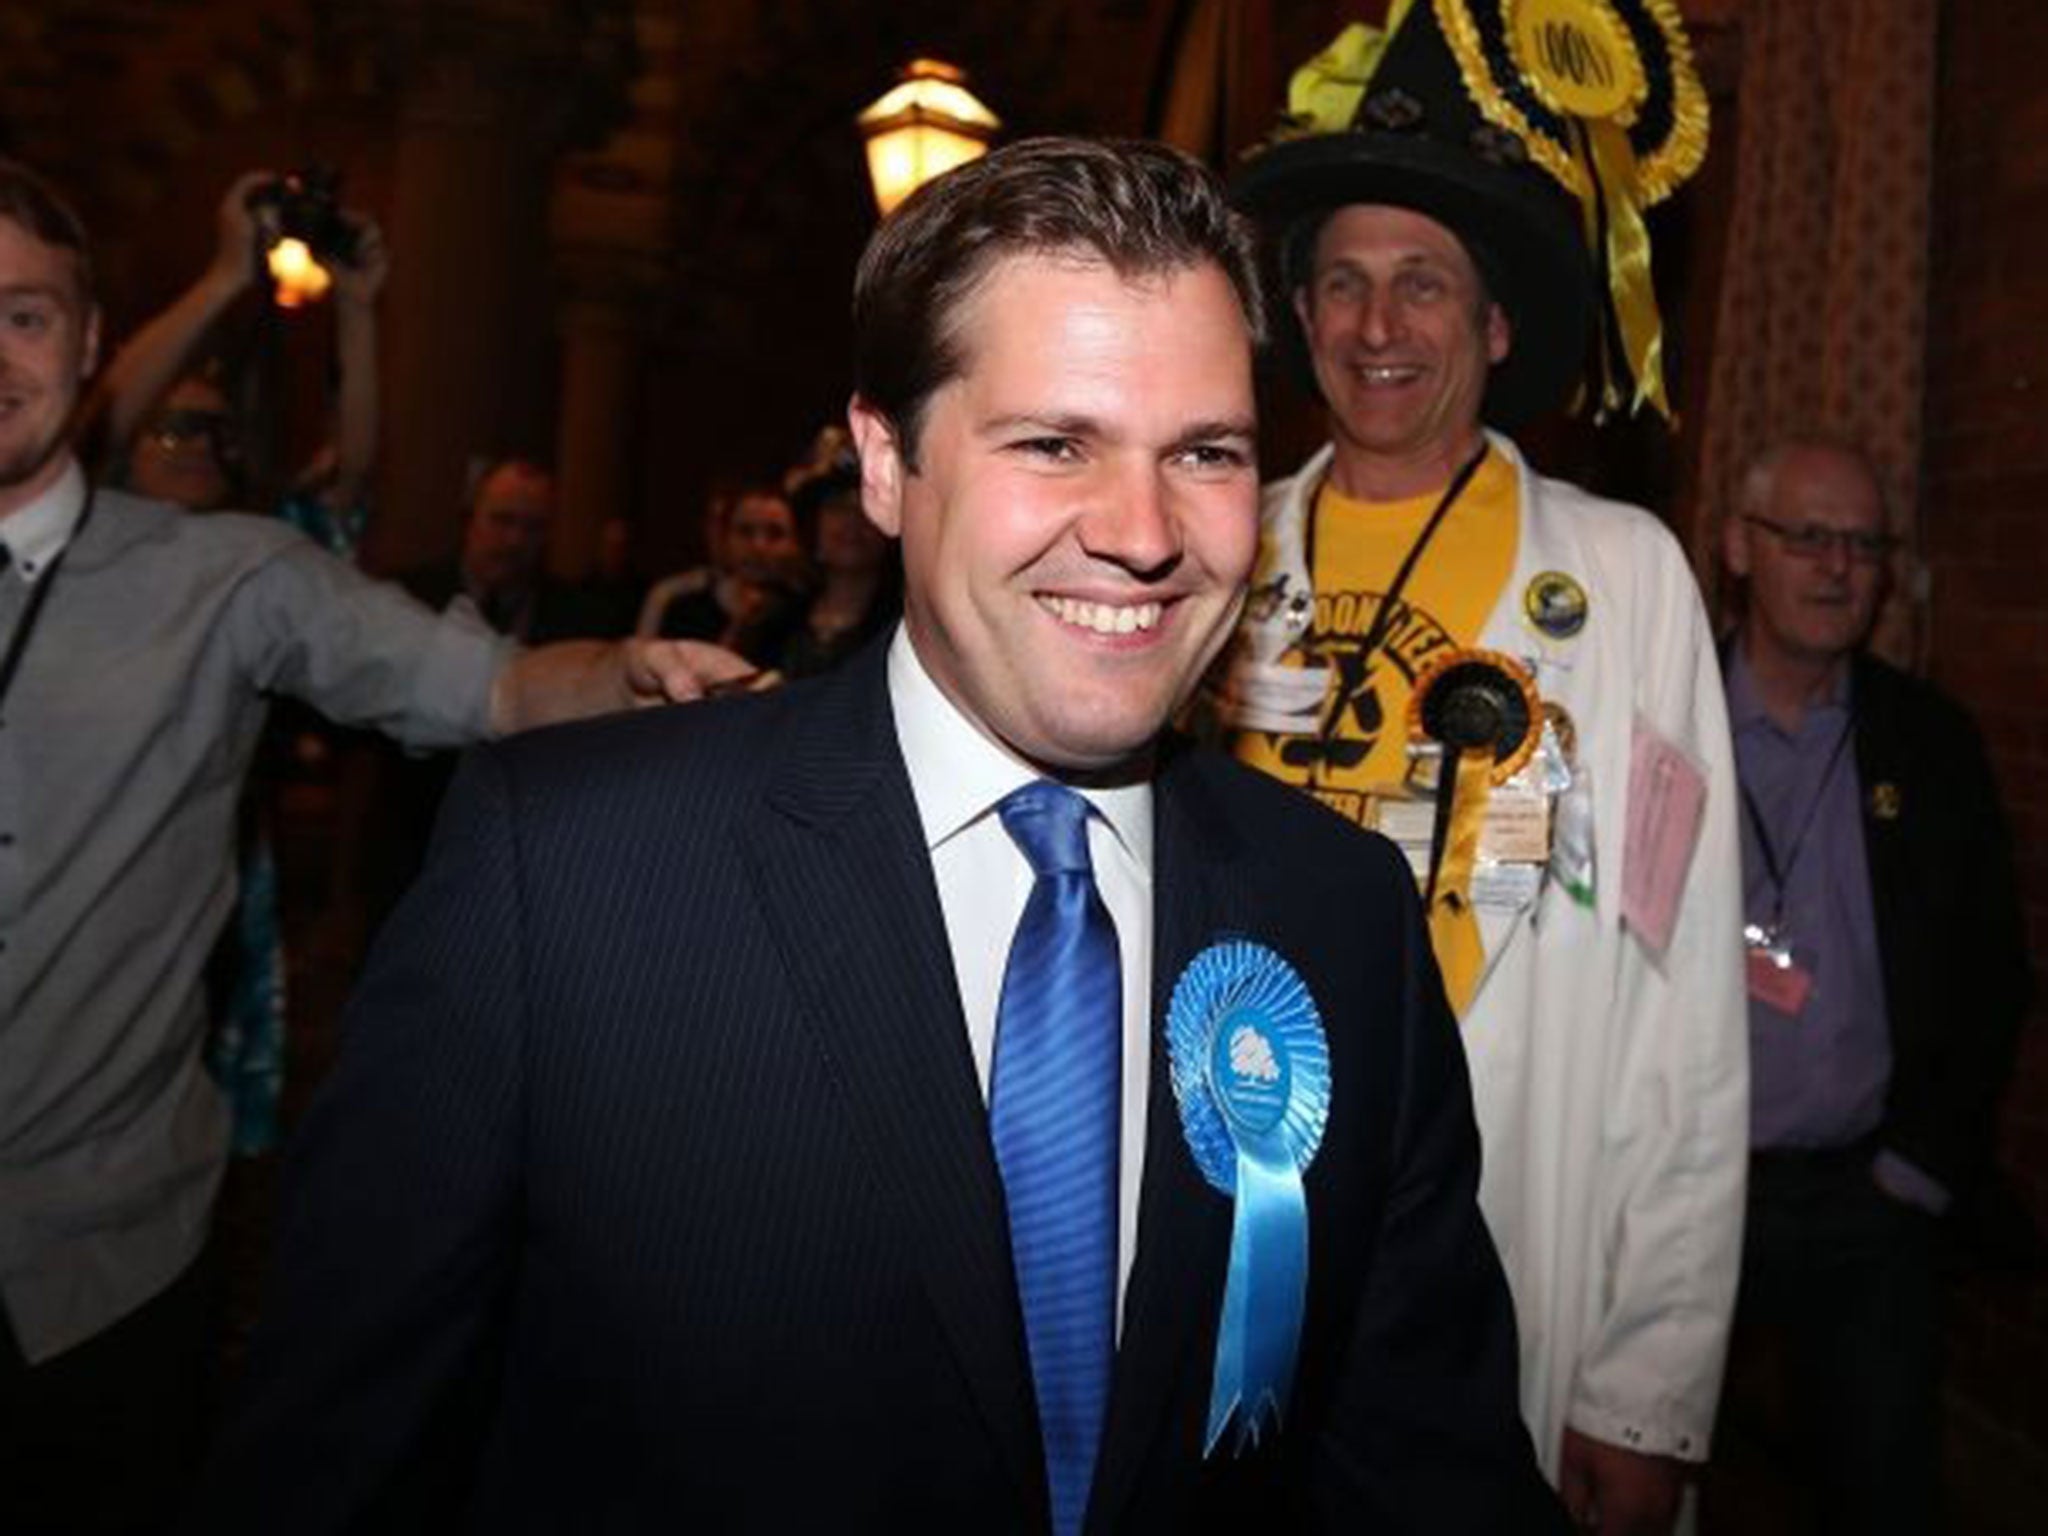 Newly-elected Tory MP Robert Jenrick after winning the Newark by-election